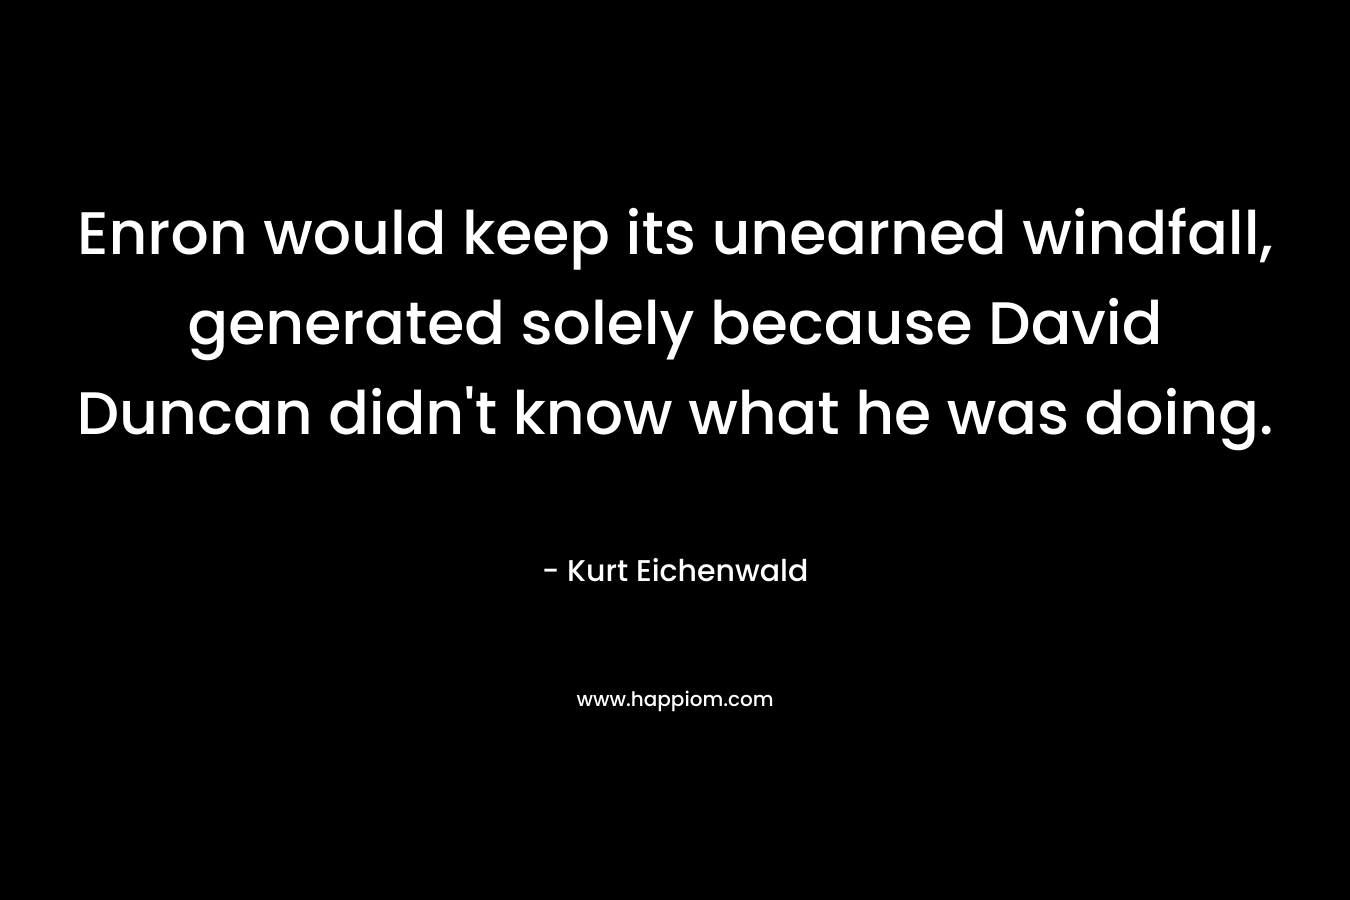 Enron would keep its unearned windfall, generated solely because David Duncan didn’t know what he was doing. – Kurt Eichenwald